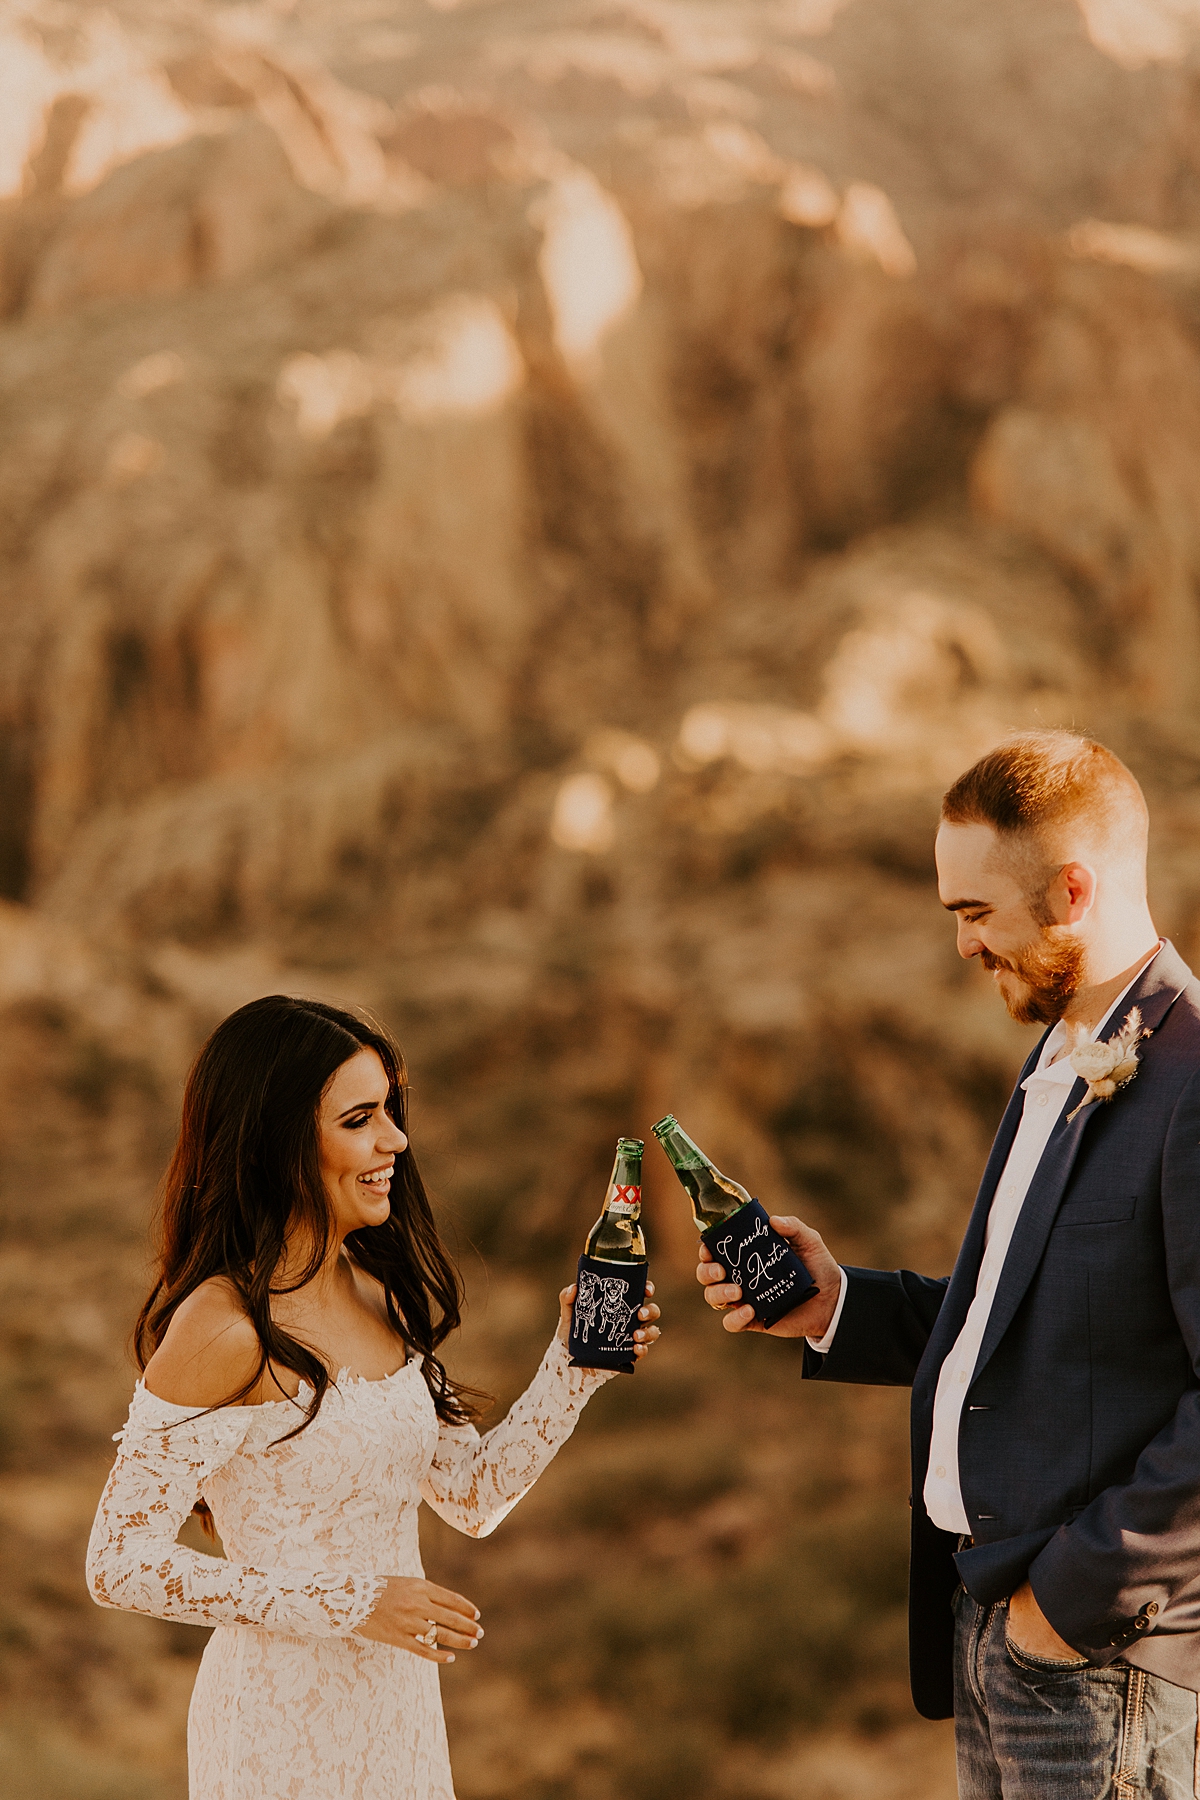 Intimate-elopement-in-superstition-mountain-wilderness-allison-slater-photography53.jpg